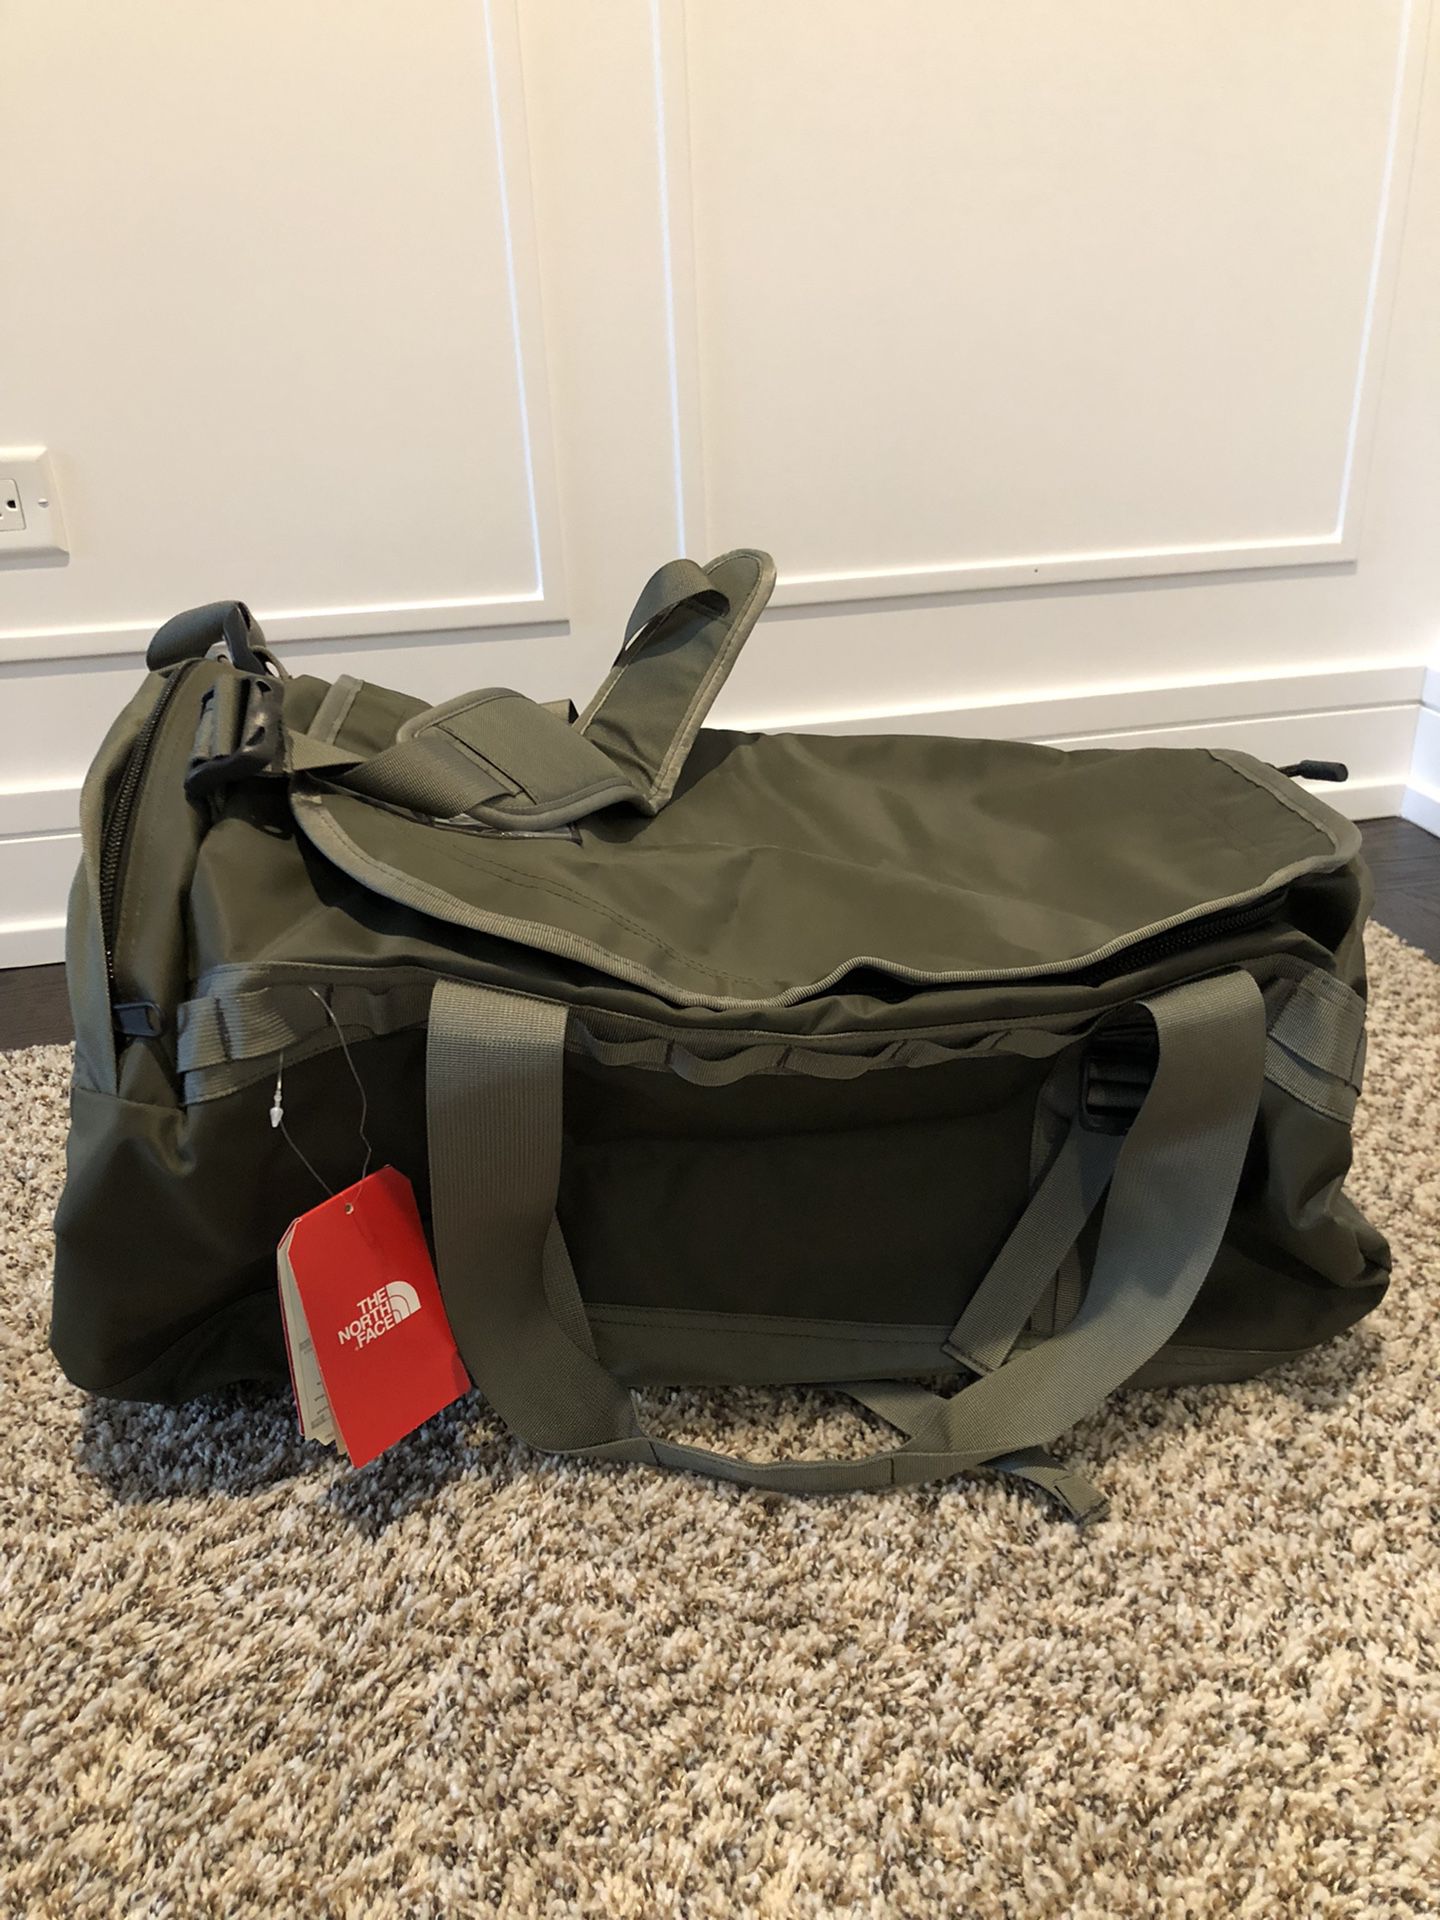 BRAND NEW NORTH FACE DUFFLE BAG